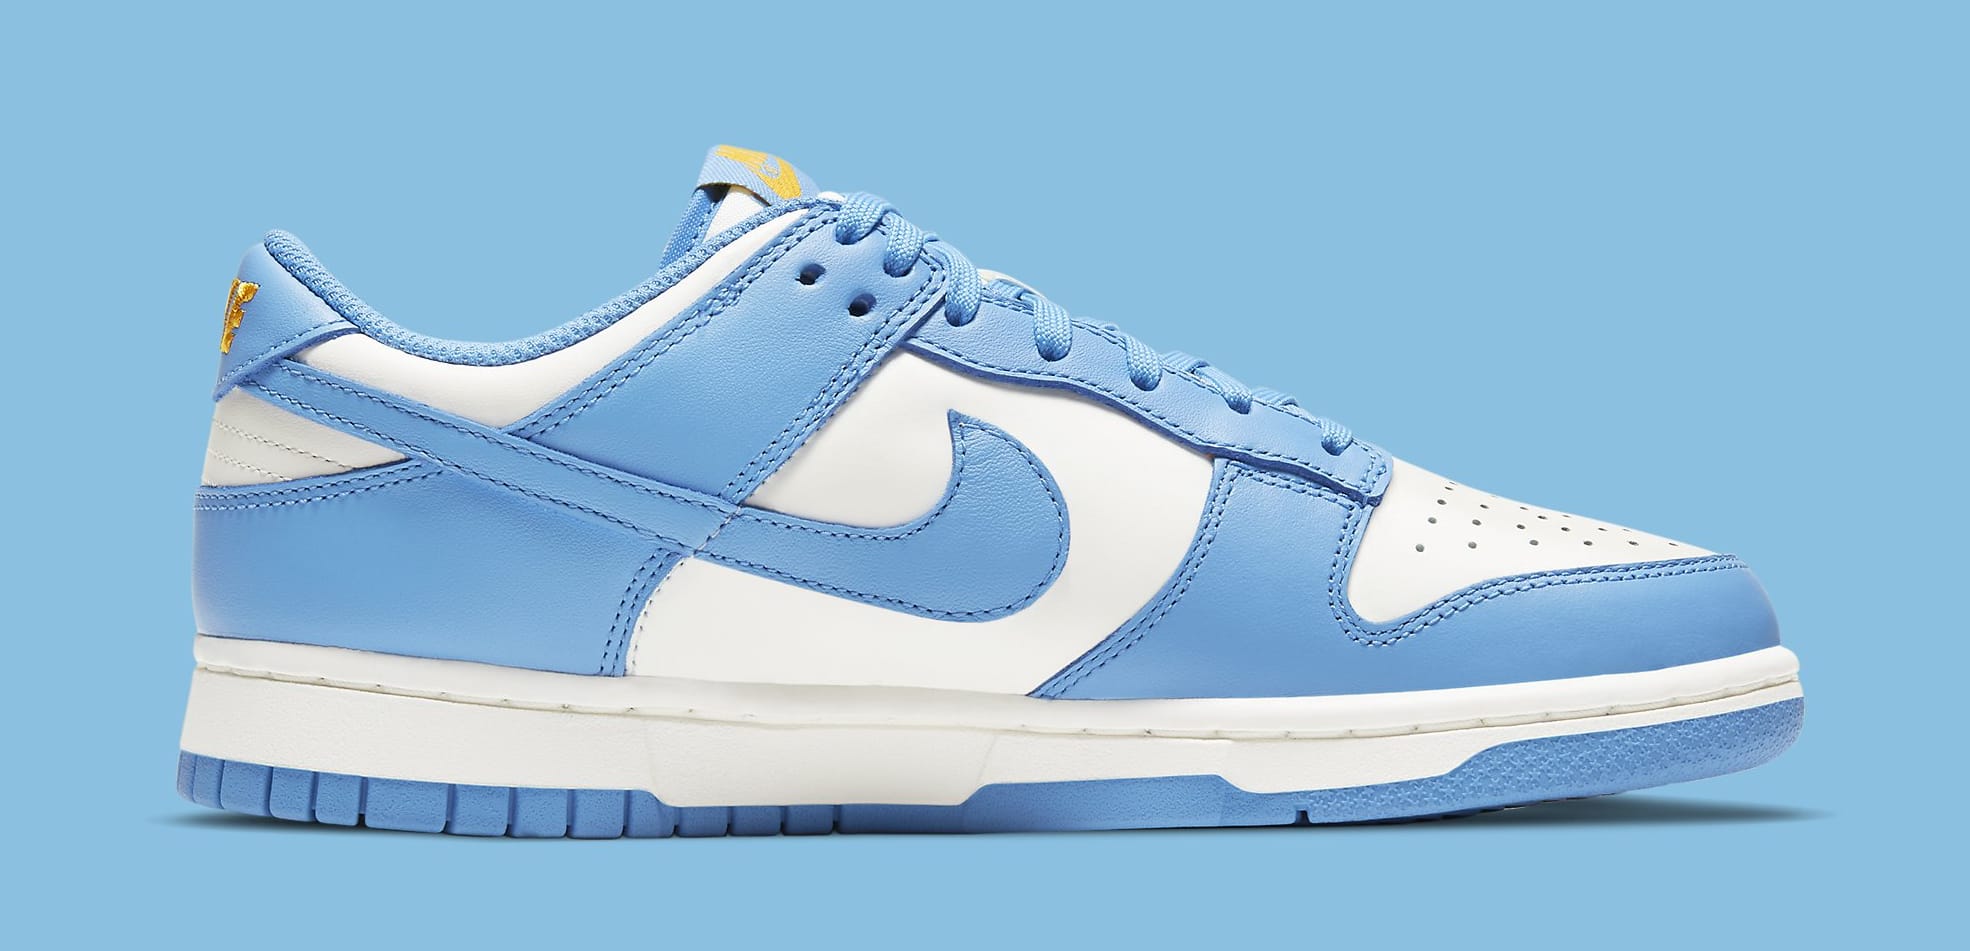 Detailed Look at the 'Coast' Nike Dunk Lows This women's exclusive style is releasing soon.